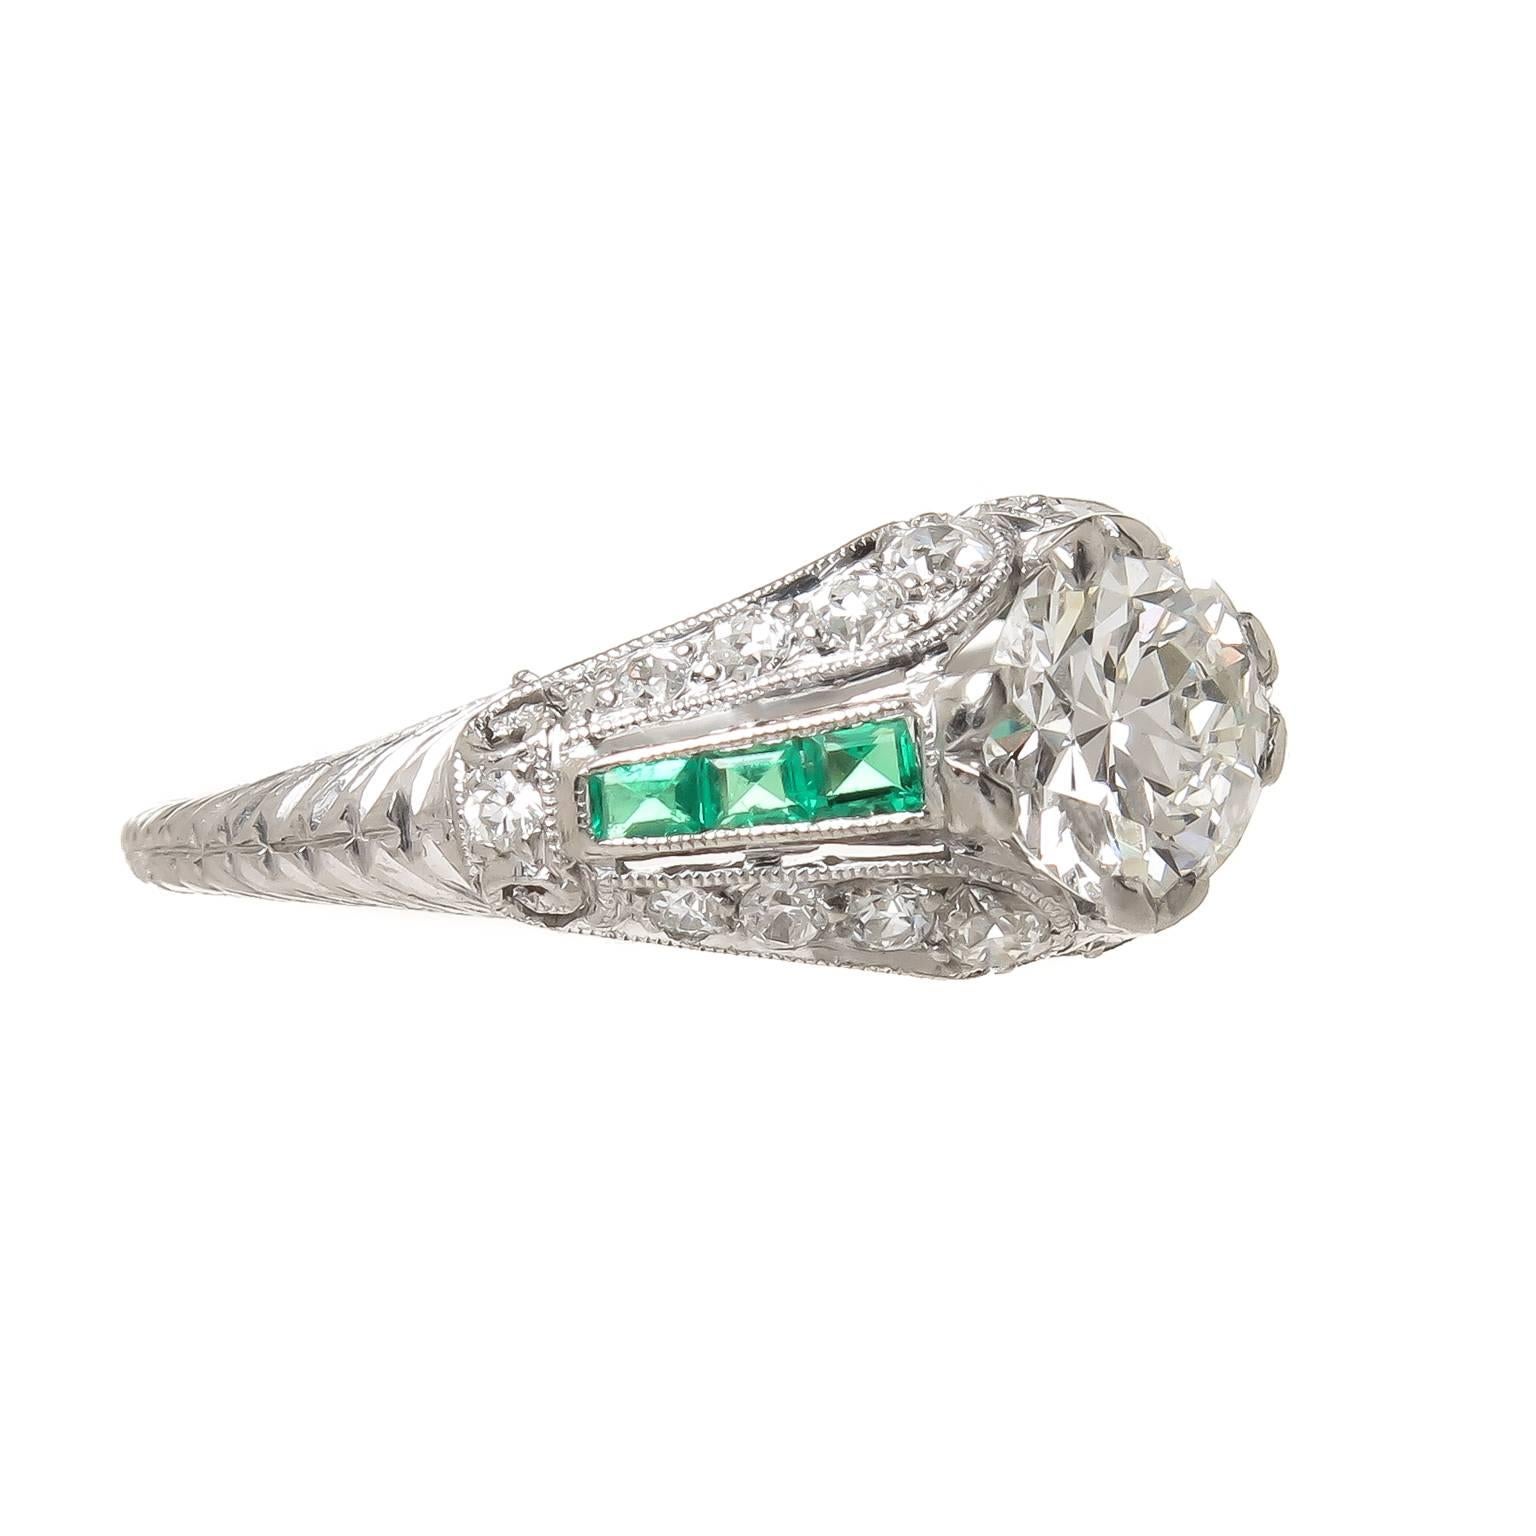 Circa 1920s Platinum and Diamond Engagement in absolutely mint almost unworn condition. Centrally set with a European Cut Diamond measuring 1 Carat and being H in Color and VS in Clarity. Flanked on either side with square cut Emeralds of very fine,